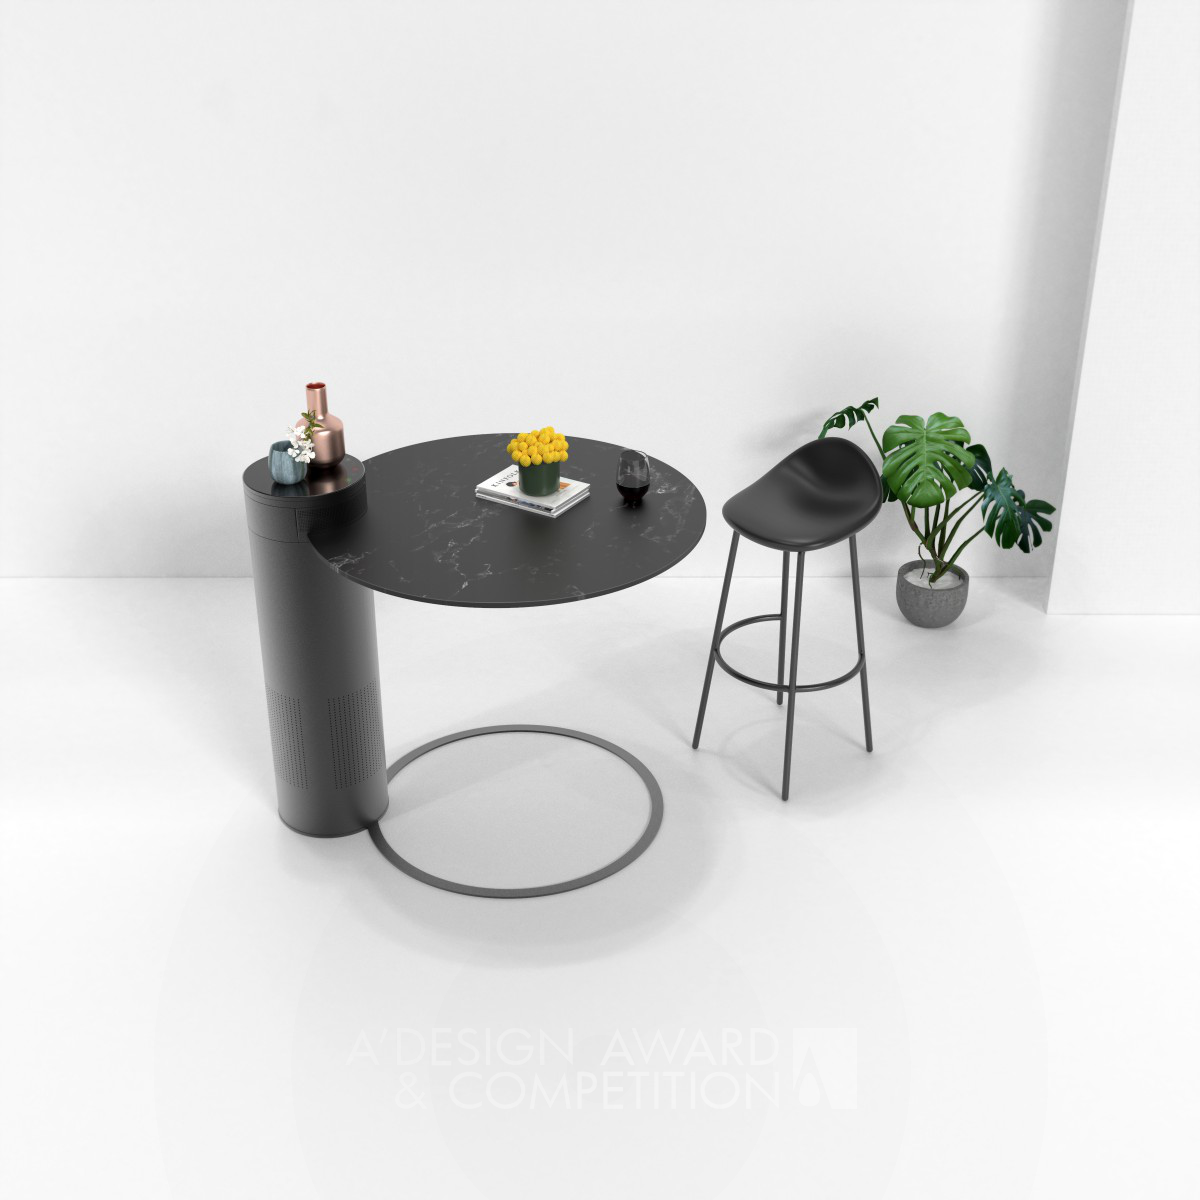 Shandong Industrial Design Institute Air Disinfection Table